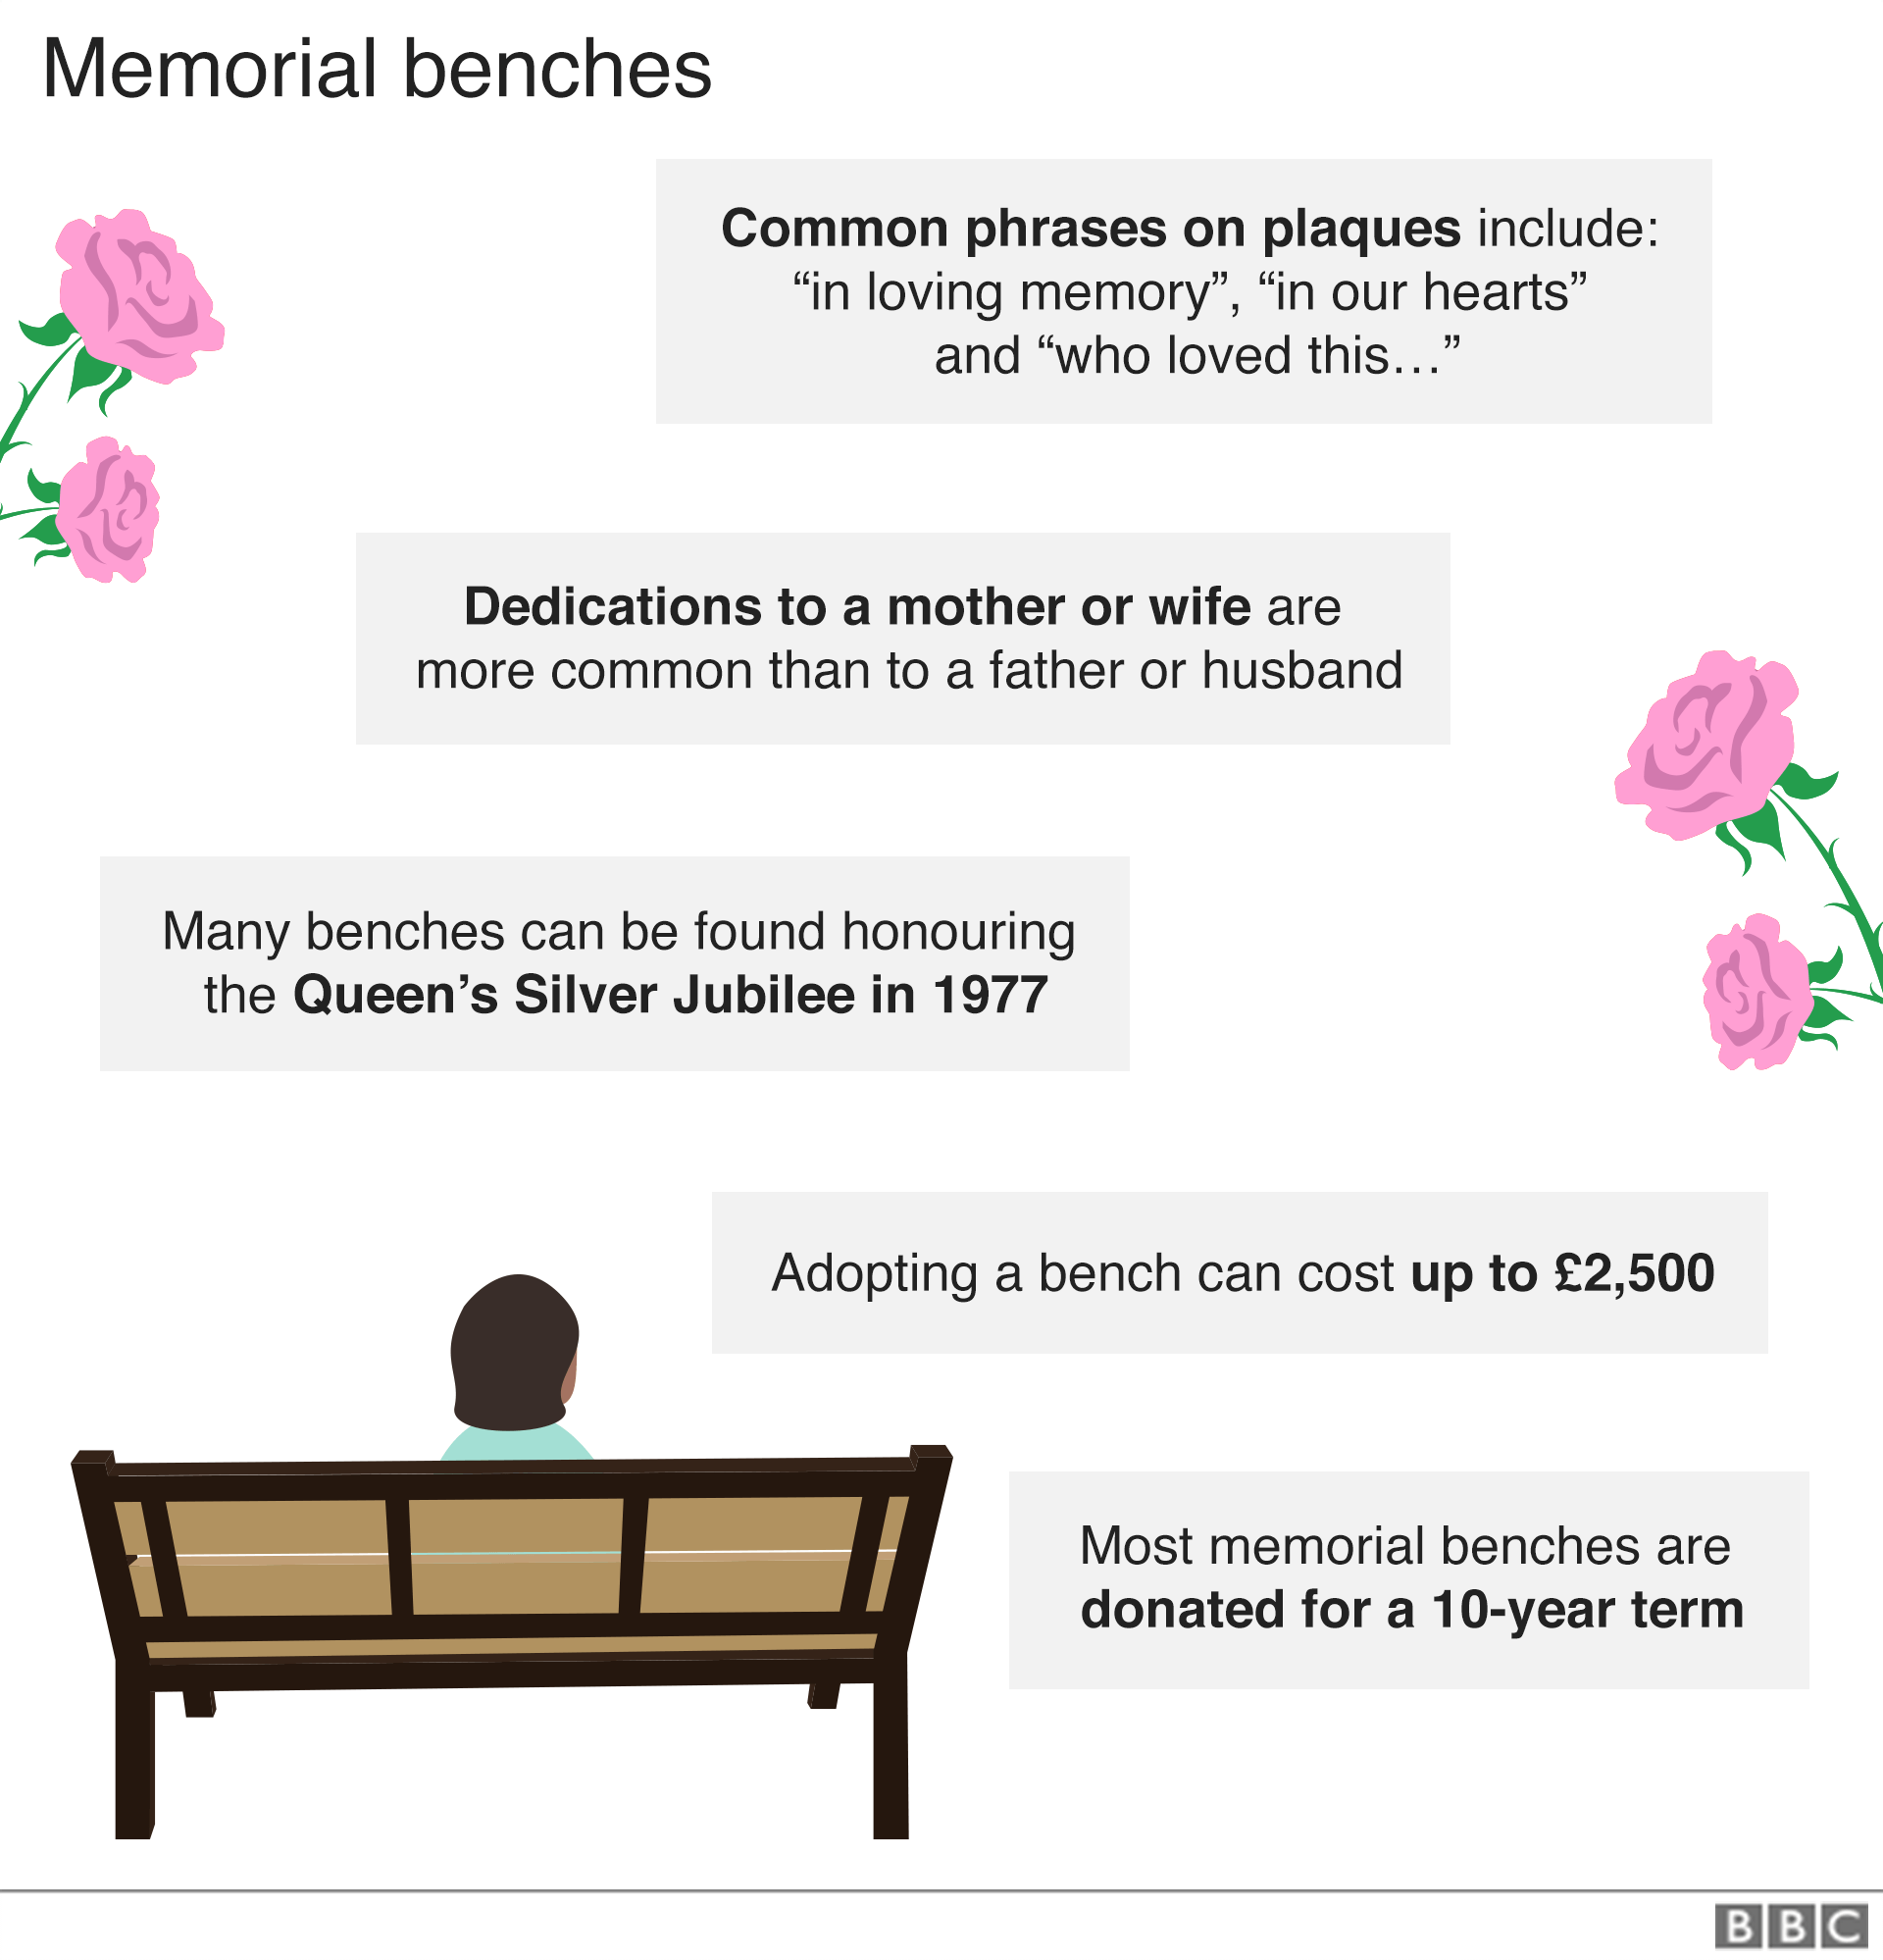 Facts about memorial benches in graphic